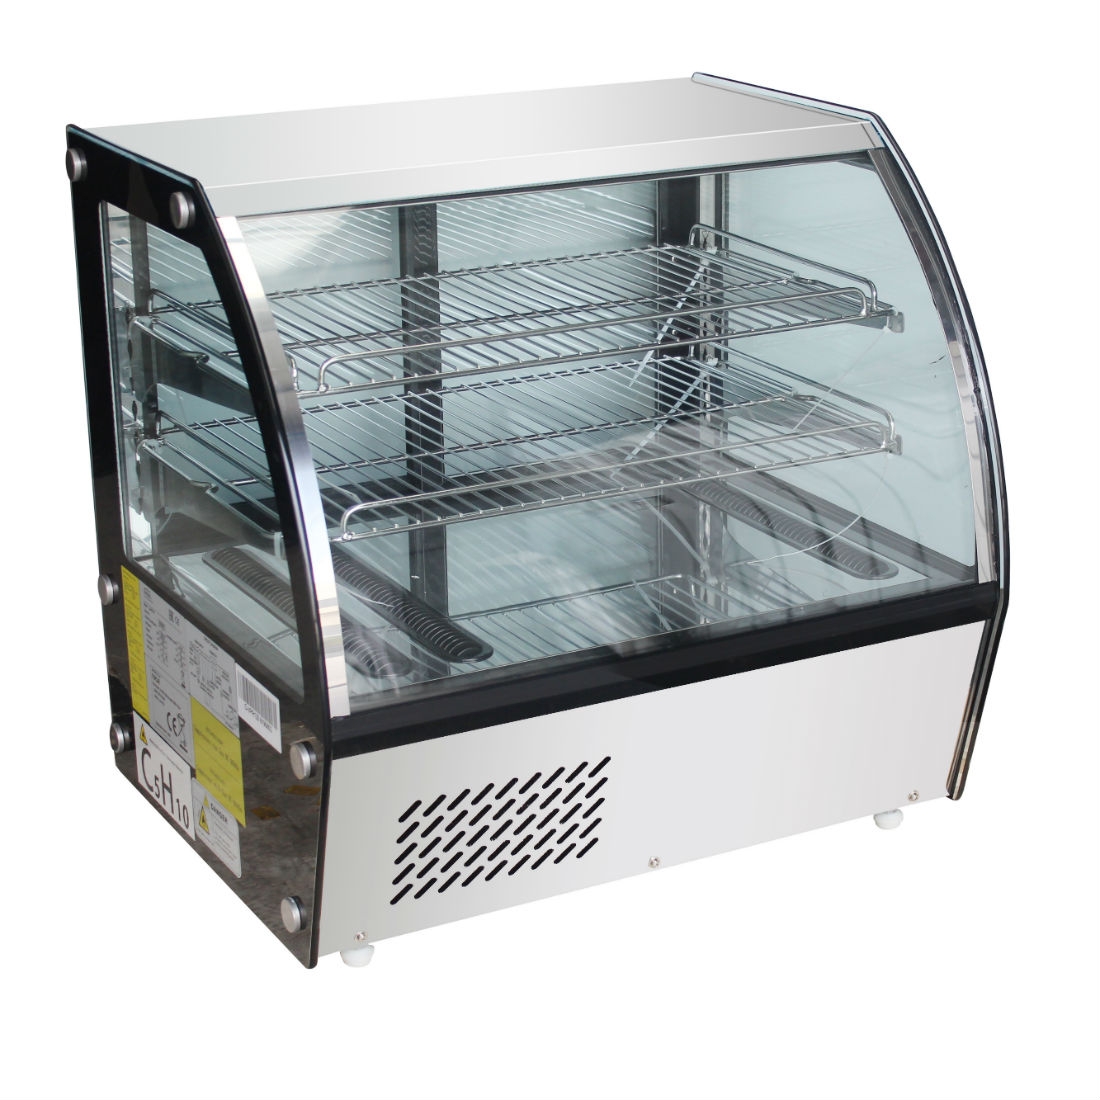 100L Chilled Counter-Top Food Display